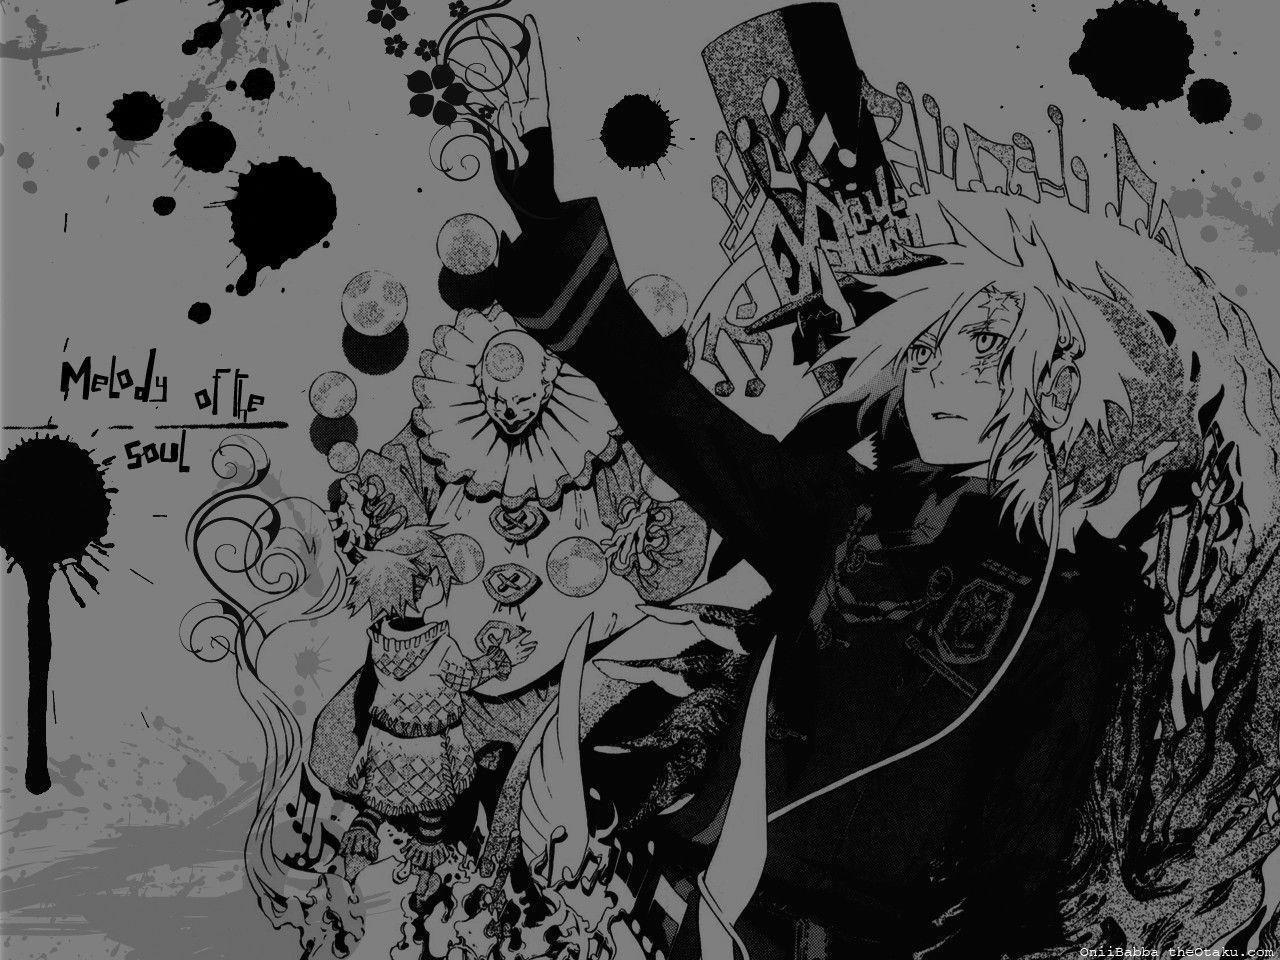 DGray Man  Hallow  I found these wallpapers through Wallpaper engine  on Steam My left monitor plays the musician score and both screens move  The score moves on the left and